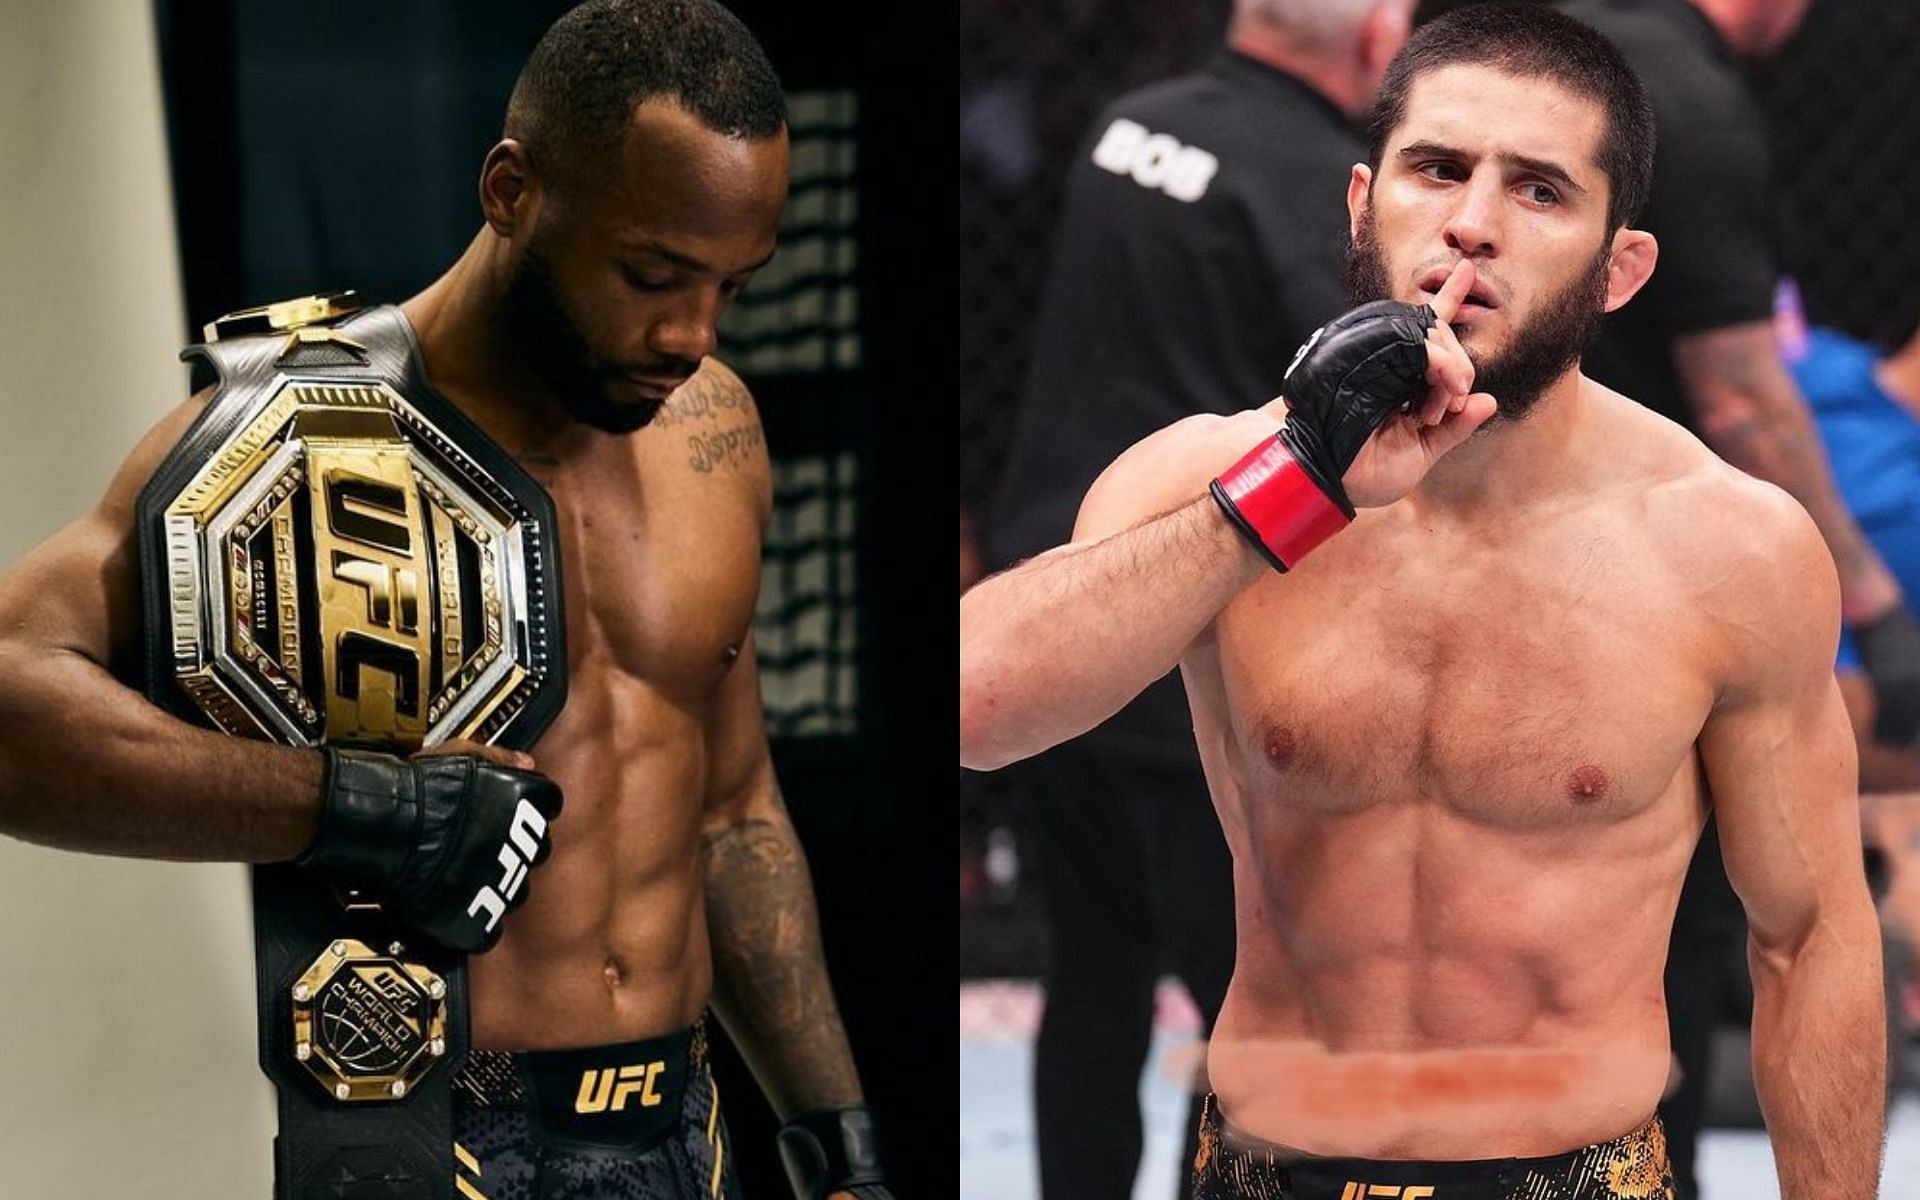 Former UFC champion makes bold claims about a potential fight between Leon Edwards (left) and Islam Makhachev (right) [Image courtesy @islam_makhachev and @leonedwardsmma on Instagram]